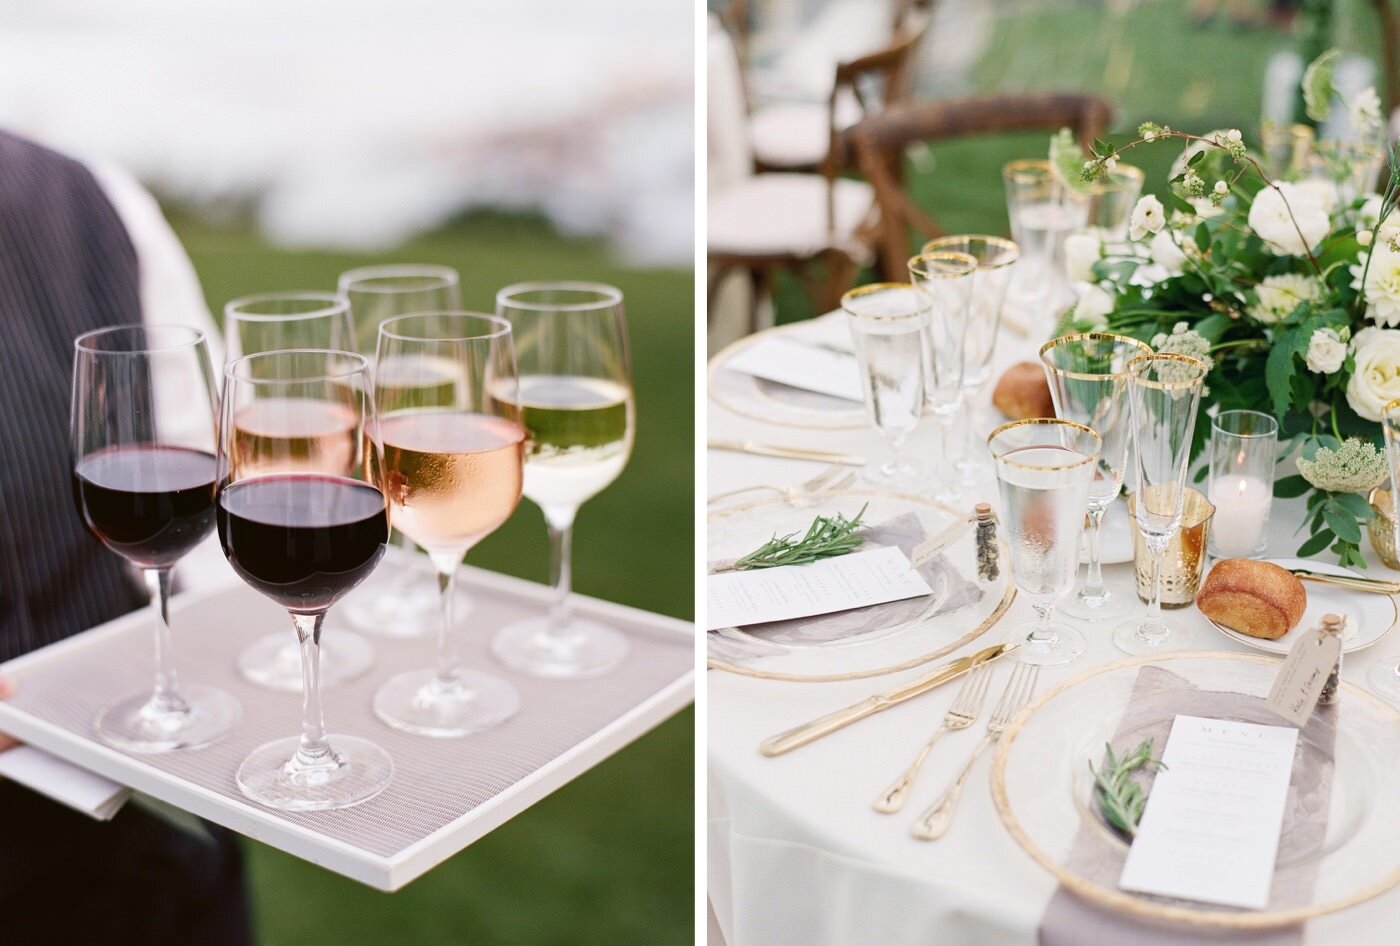 Drinks and table settings at a classic Admiral's House wedding on the Seattle Waterfront